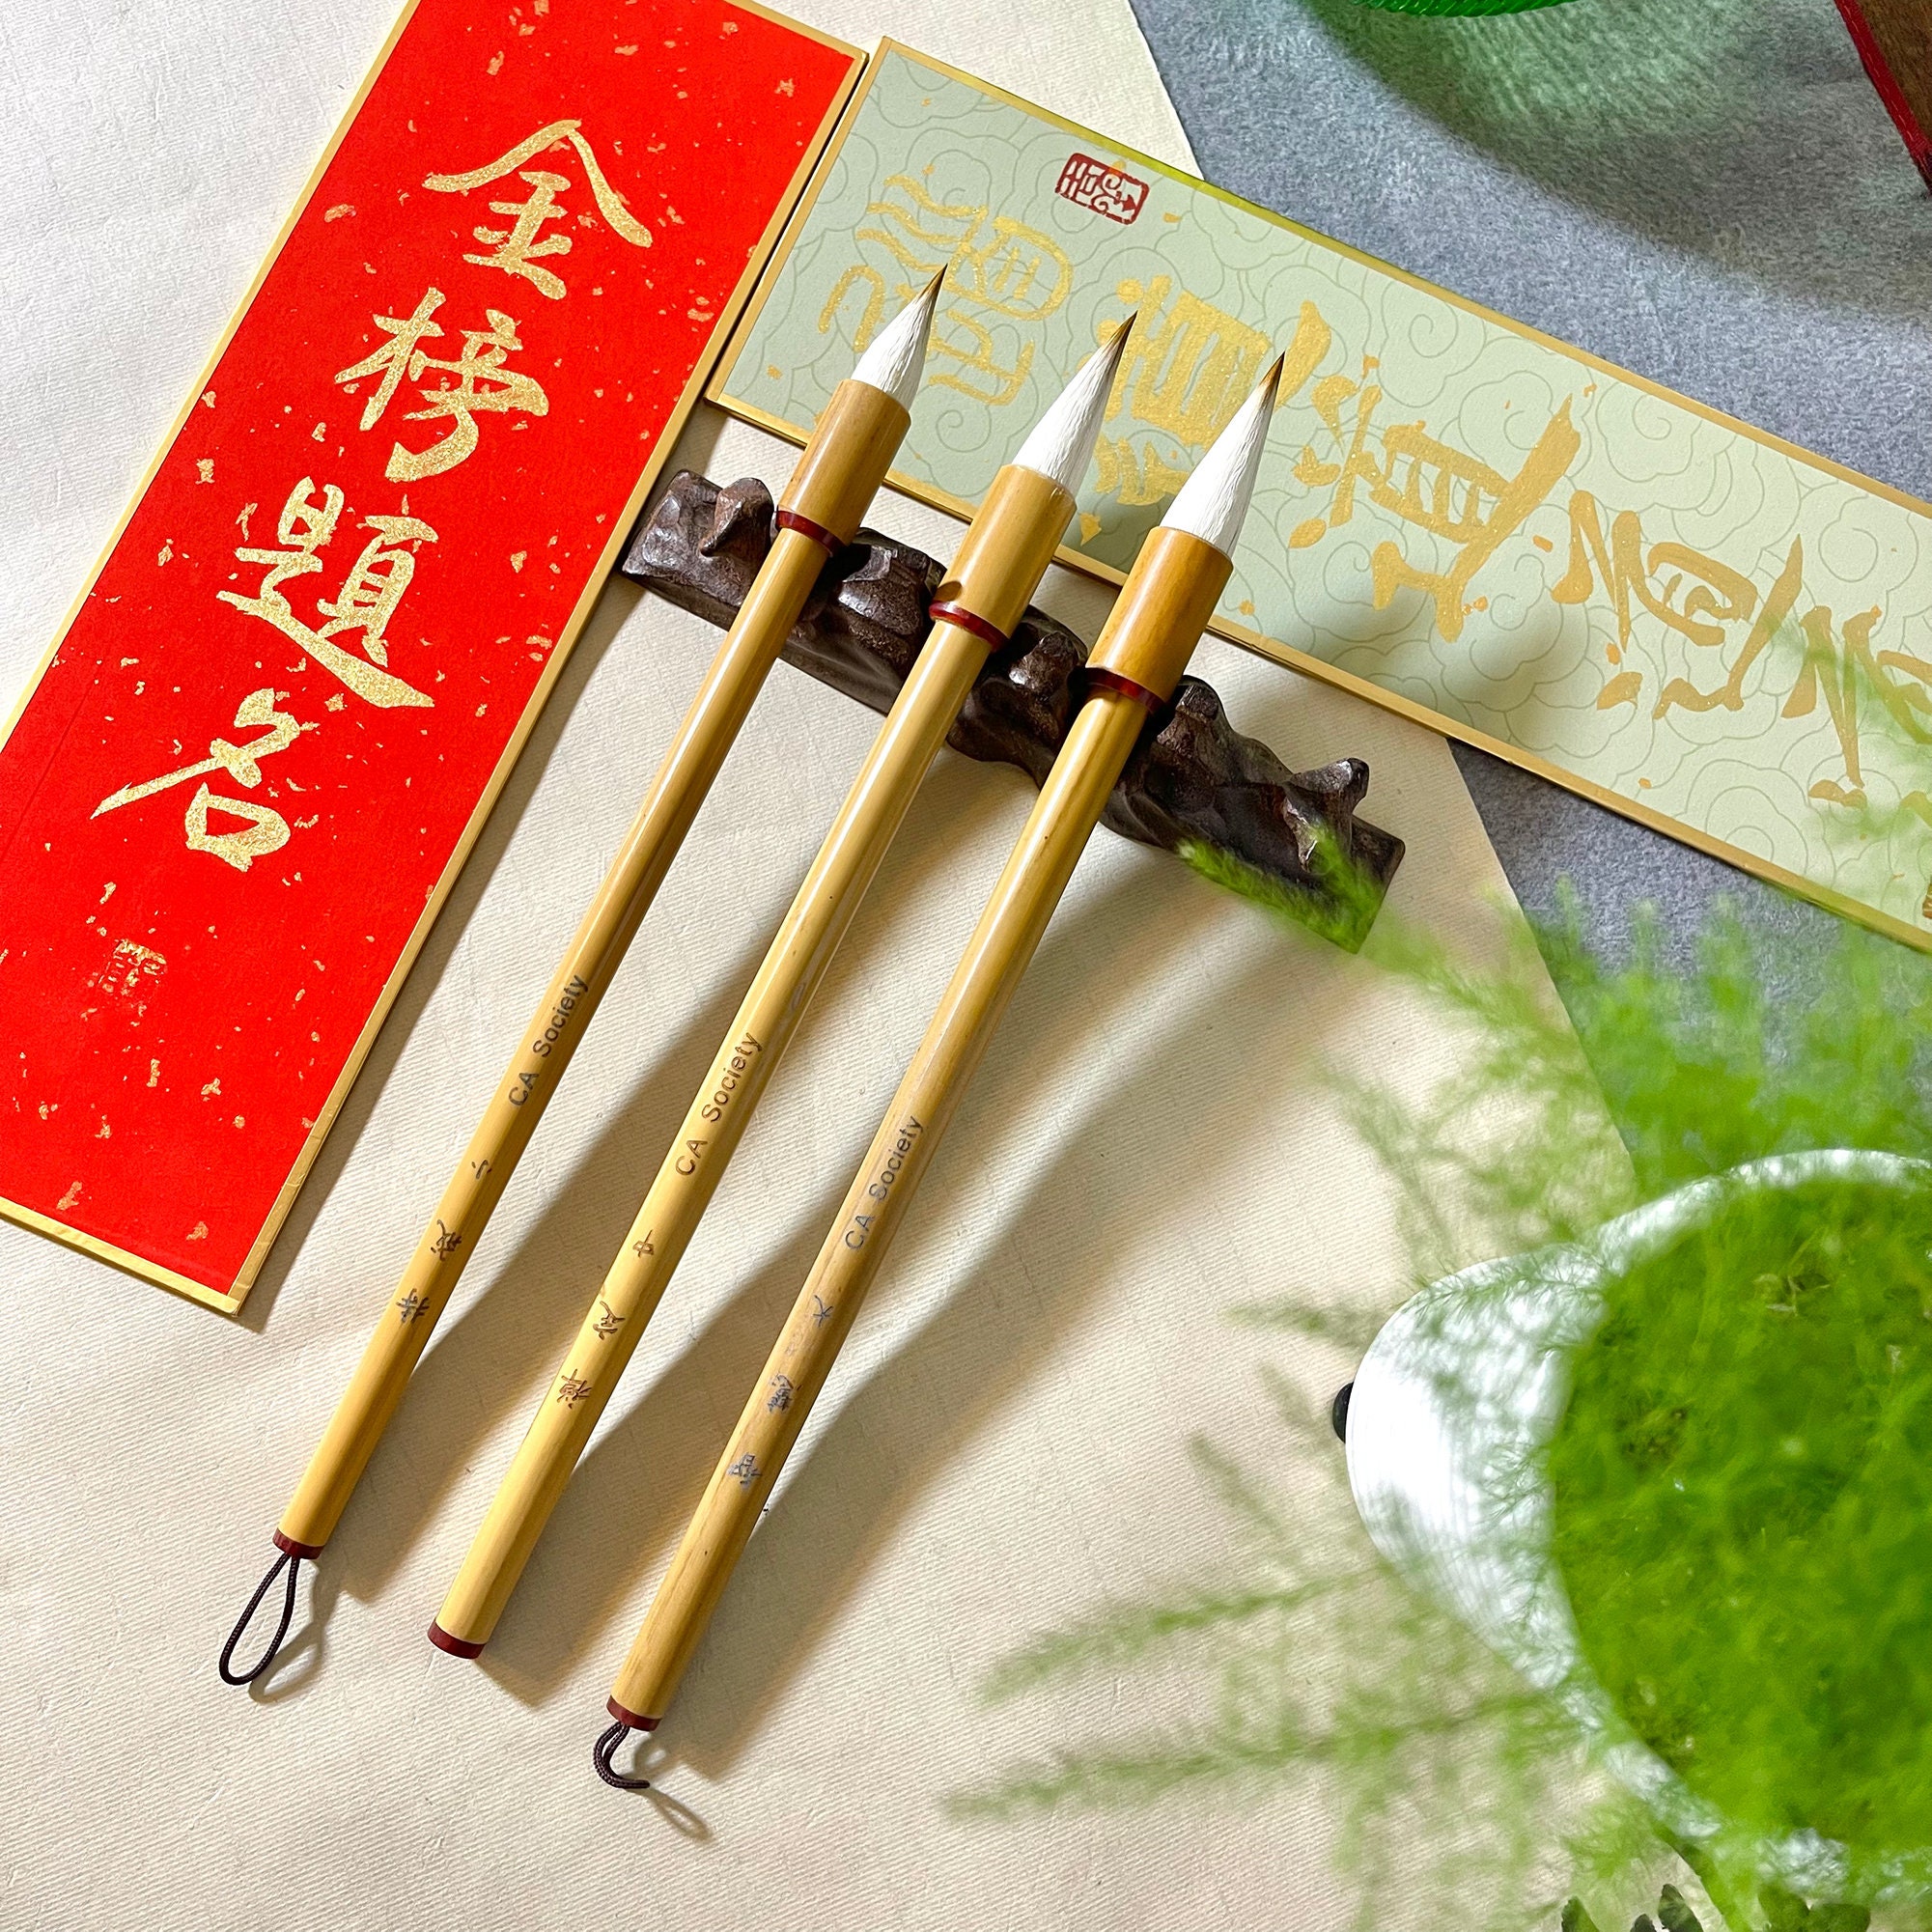 CA Society Chinese Calligraphy Set Japanese Calligraphy Brush Gift Set Brush Calligraphy Ink Water Writing Cloth 9 Pcs for Beginners